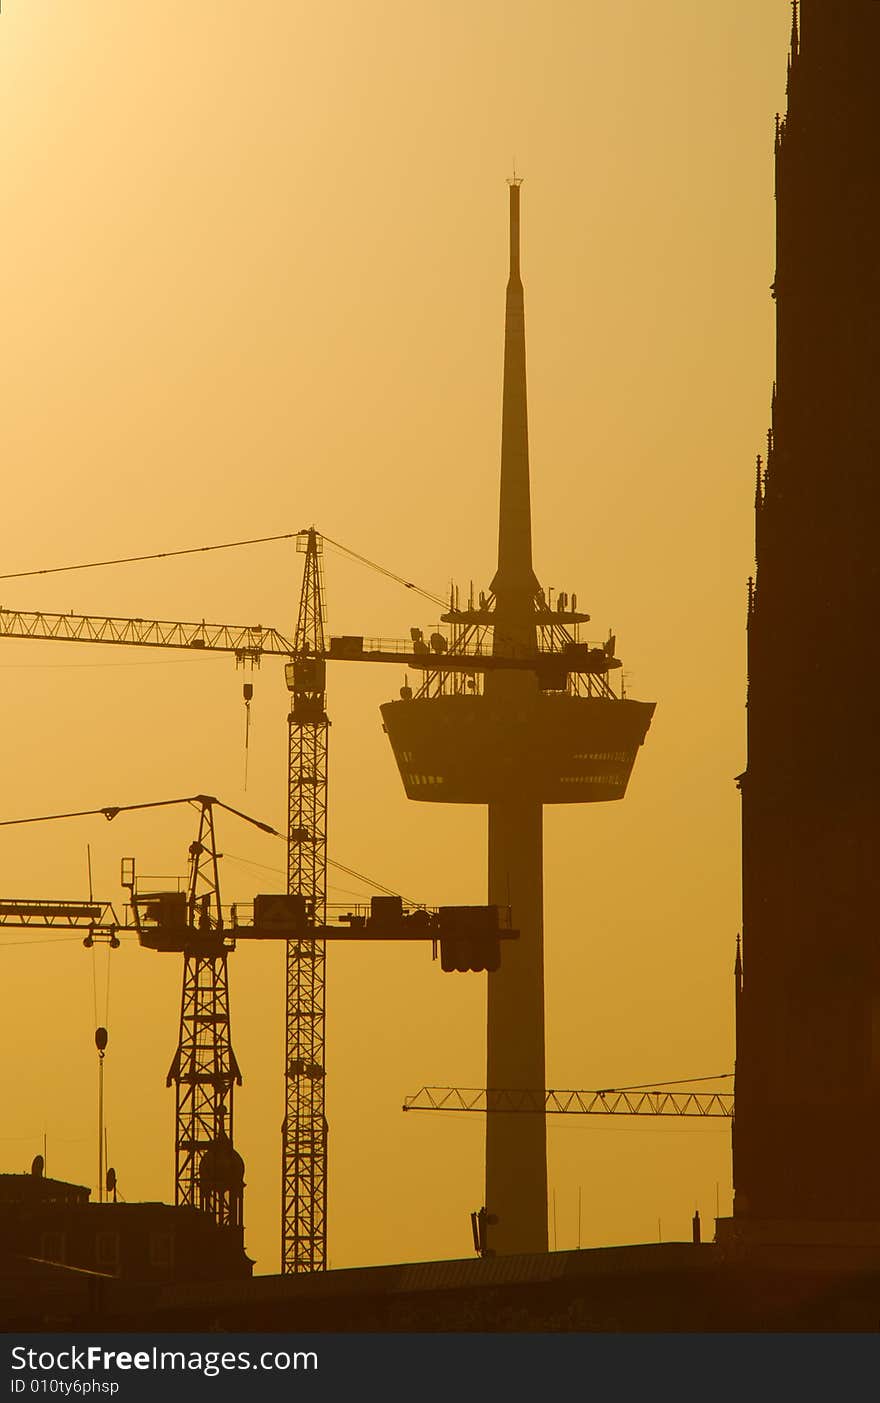 Germany, Cologne, Radio tower in sunset